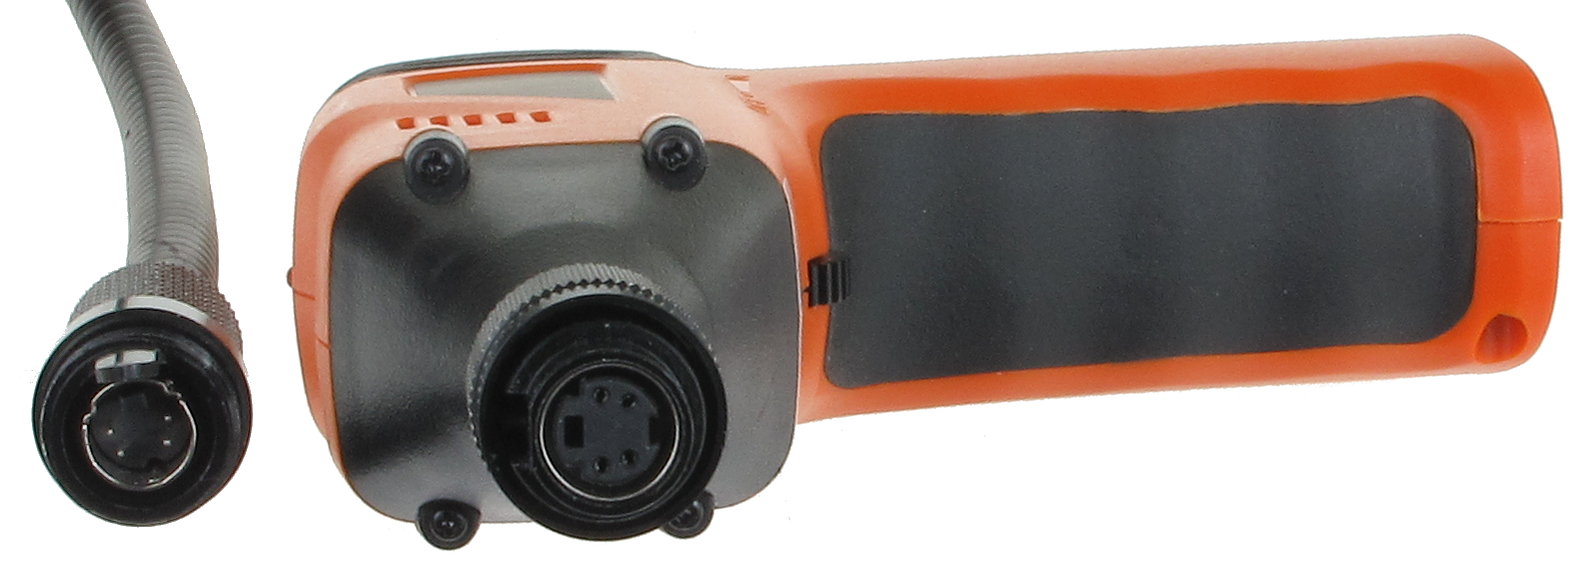 INSPECTION CAMERA SPY-CAM WIRELESS MONITOR - Hidden and Specialized Cameras  - Delta